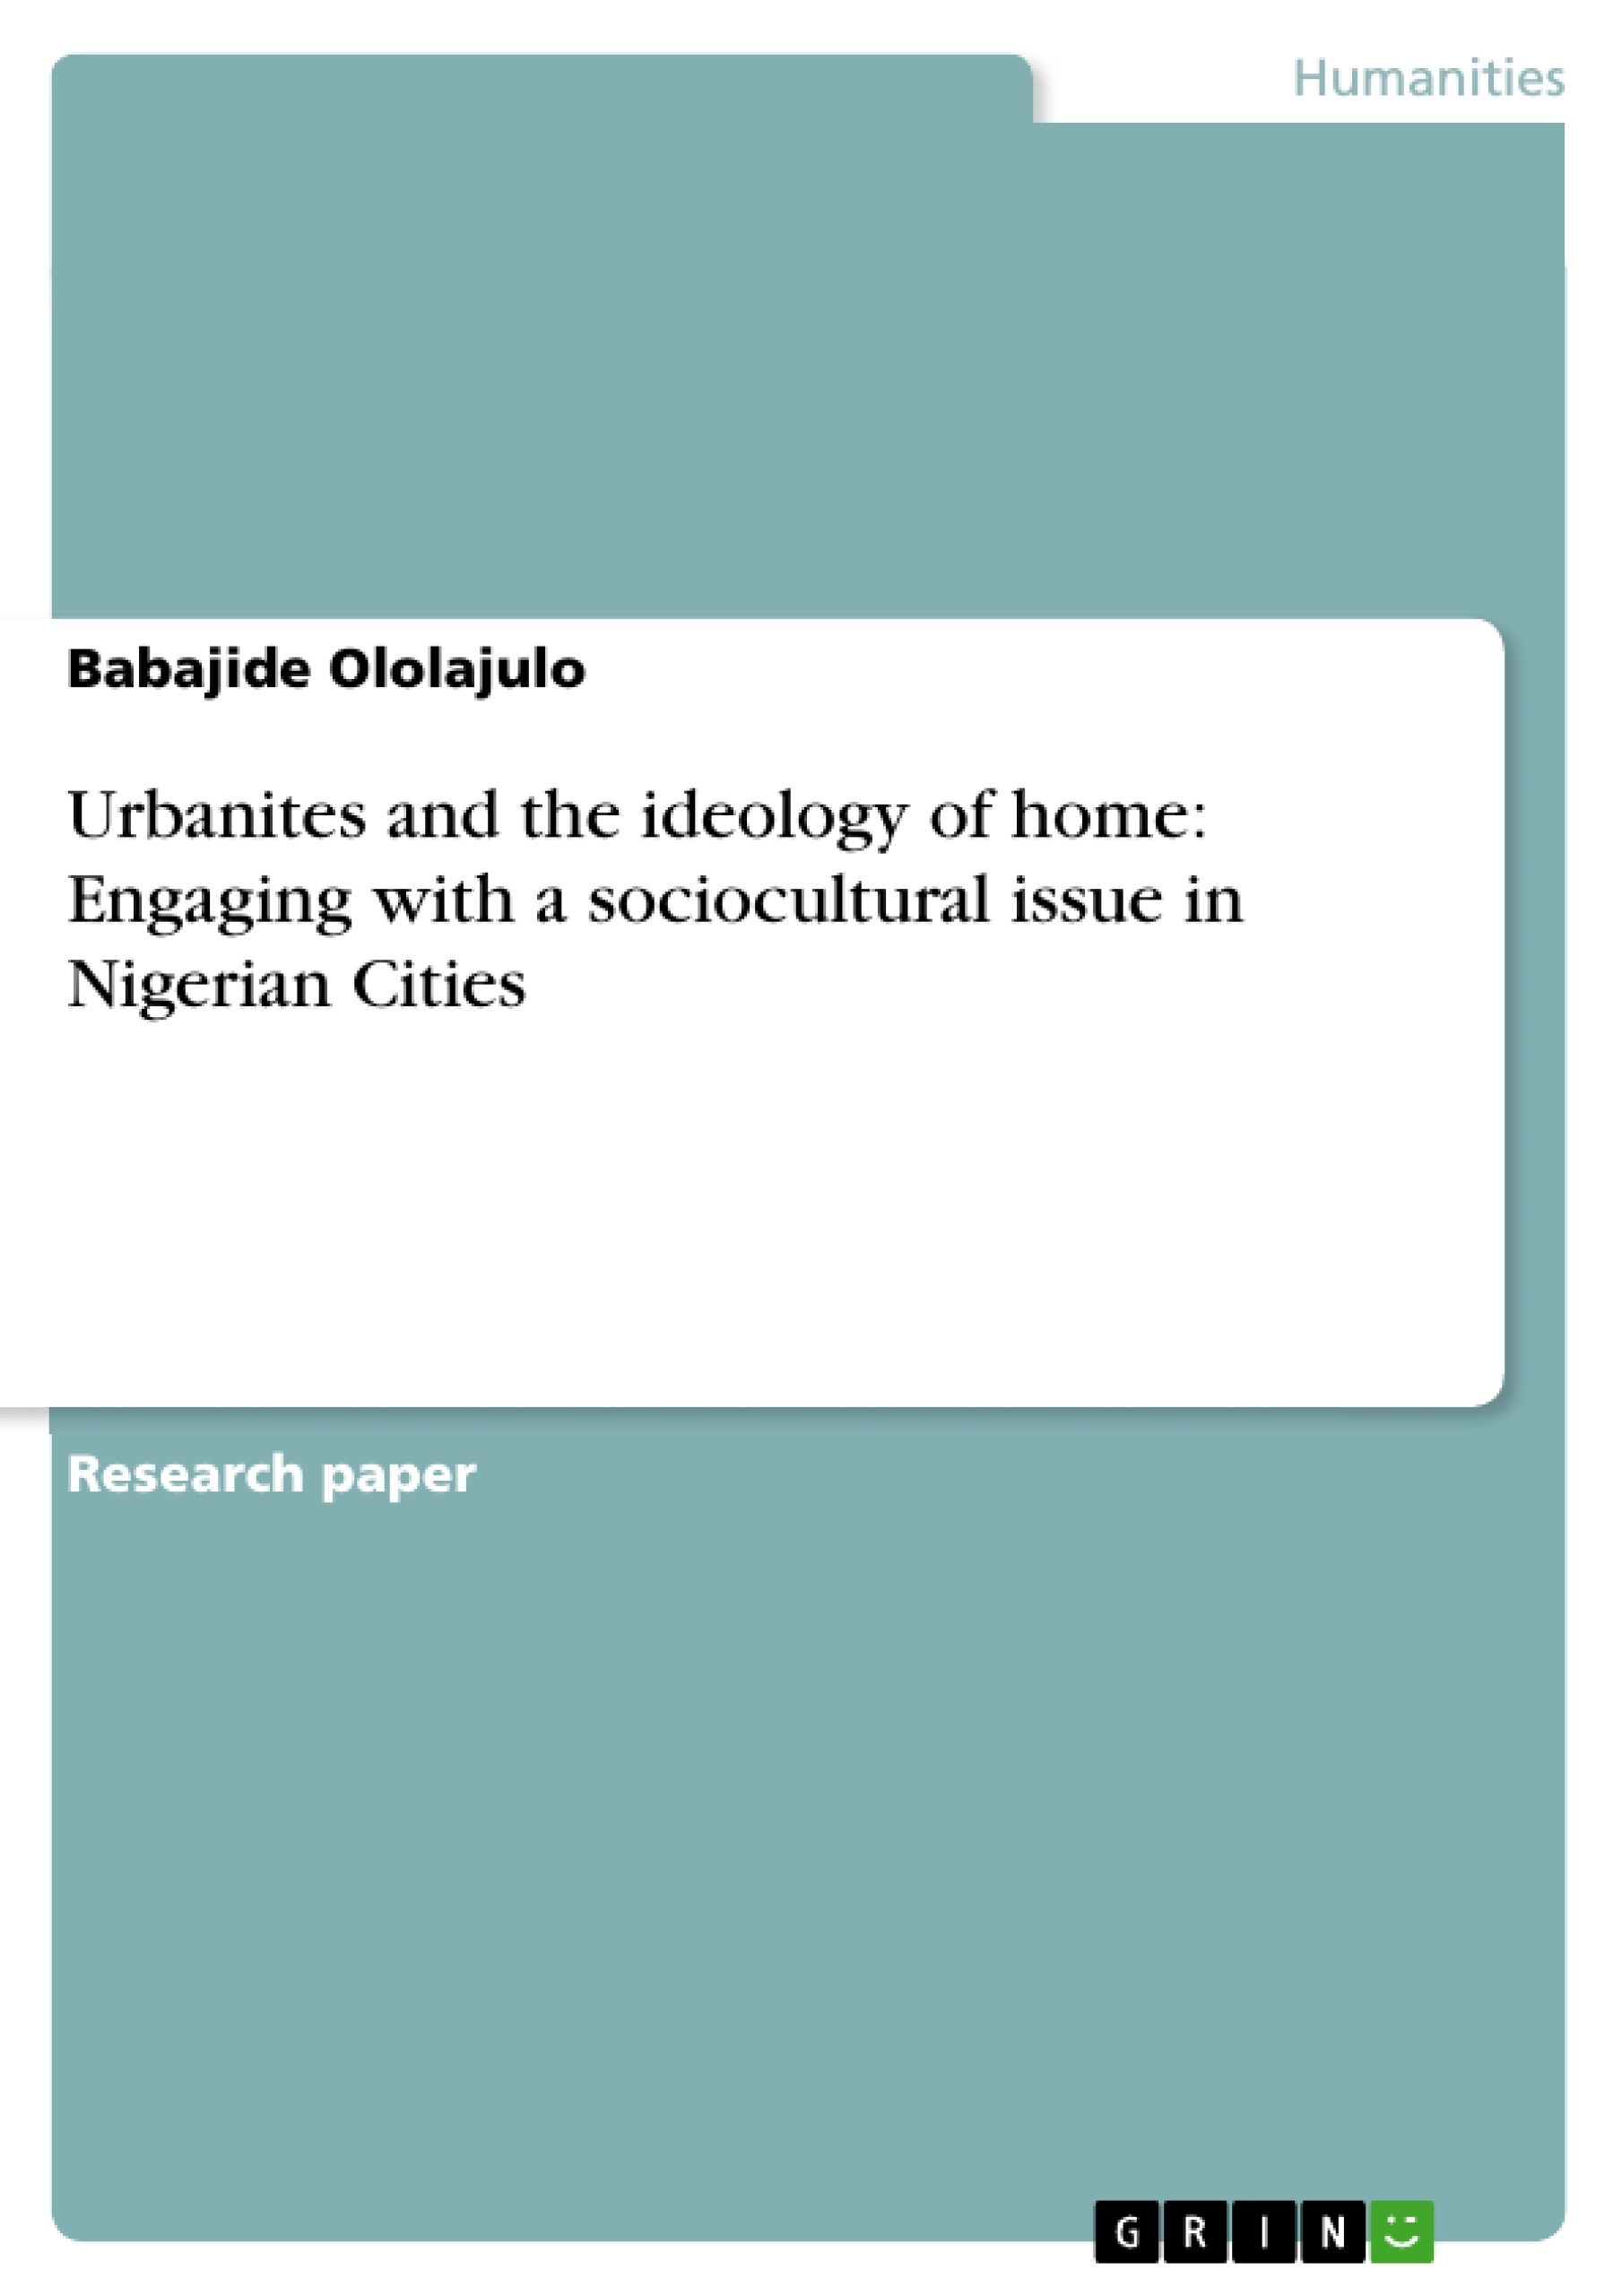 Título: Urbanites and the ideology of home: Engaging with a sociocultural issue in Nigerian Cities